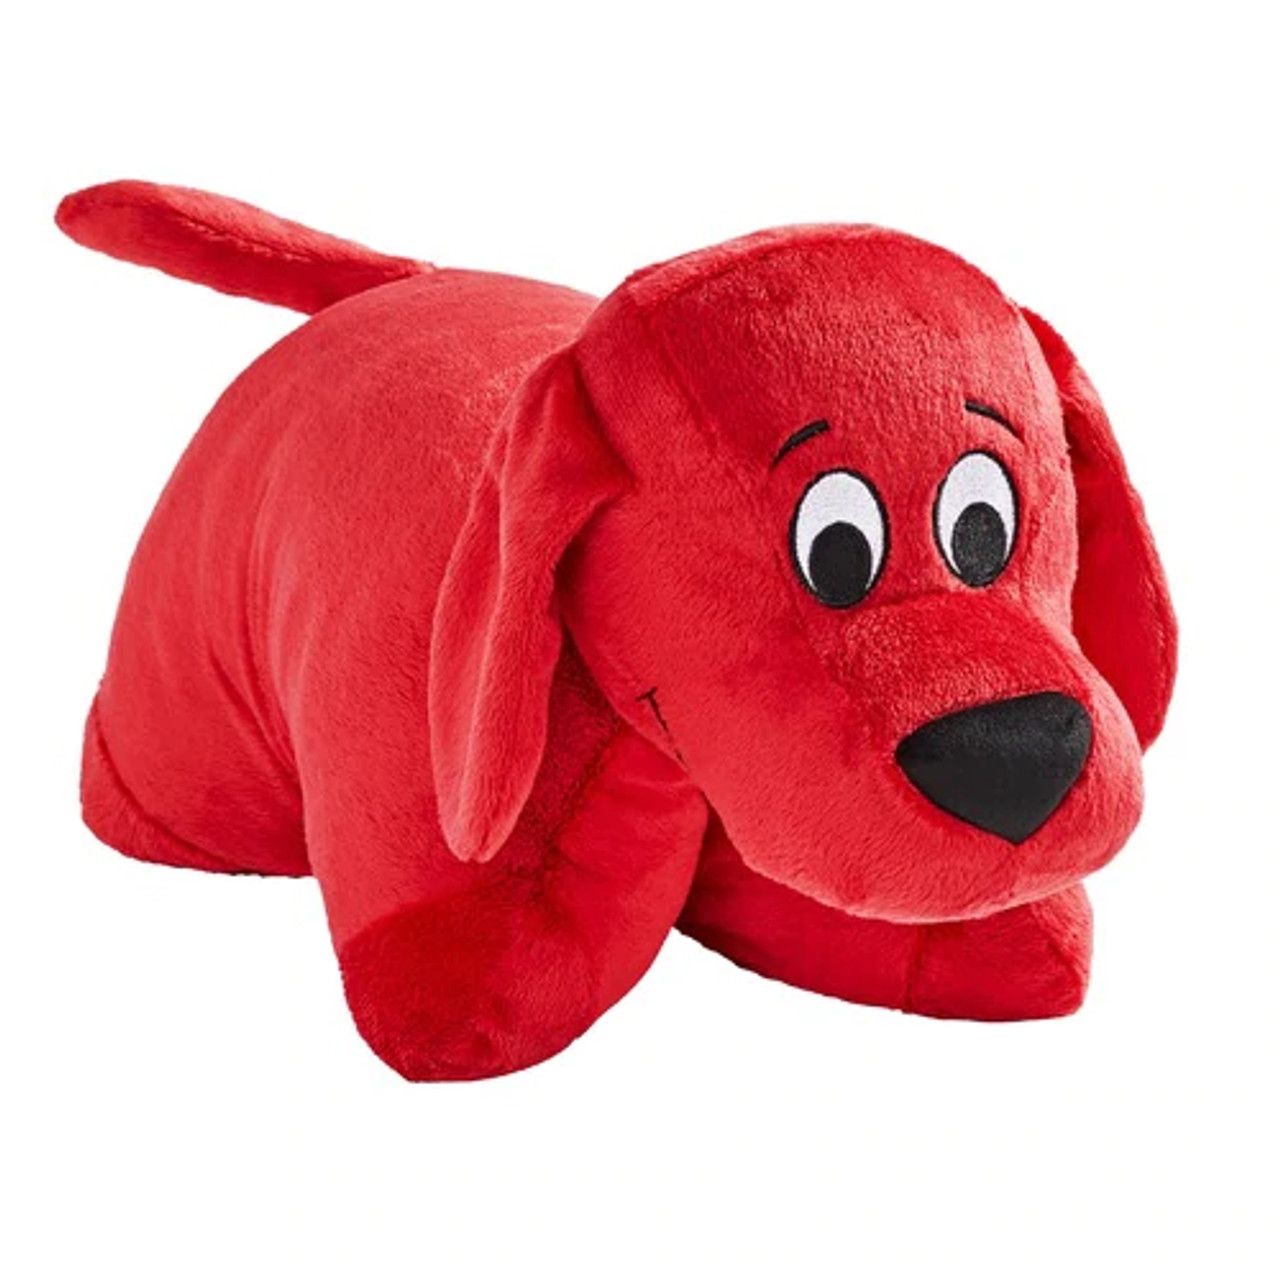 Clifford The Big Red Dog Plush - Pillow Pets